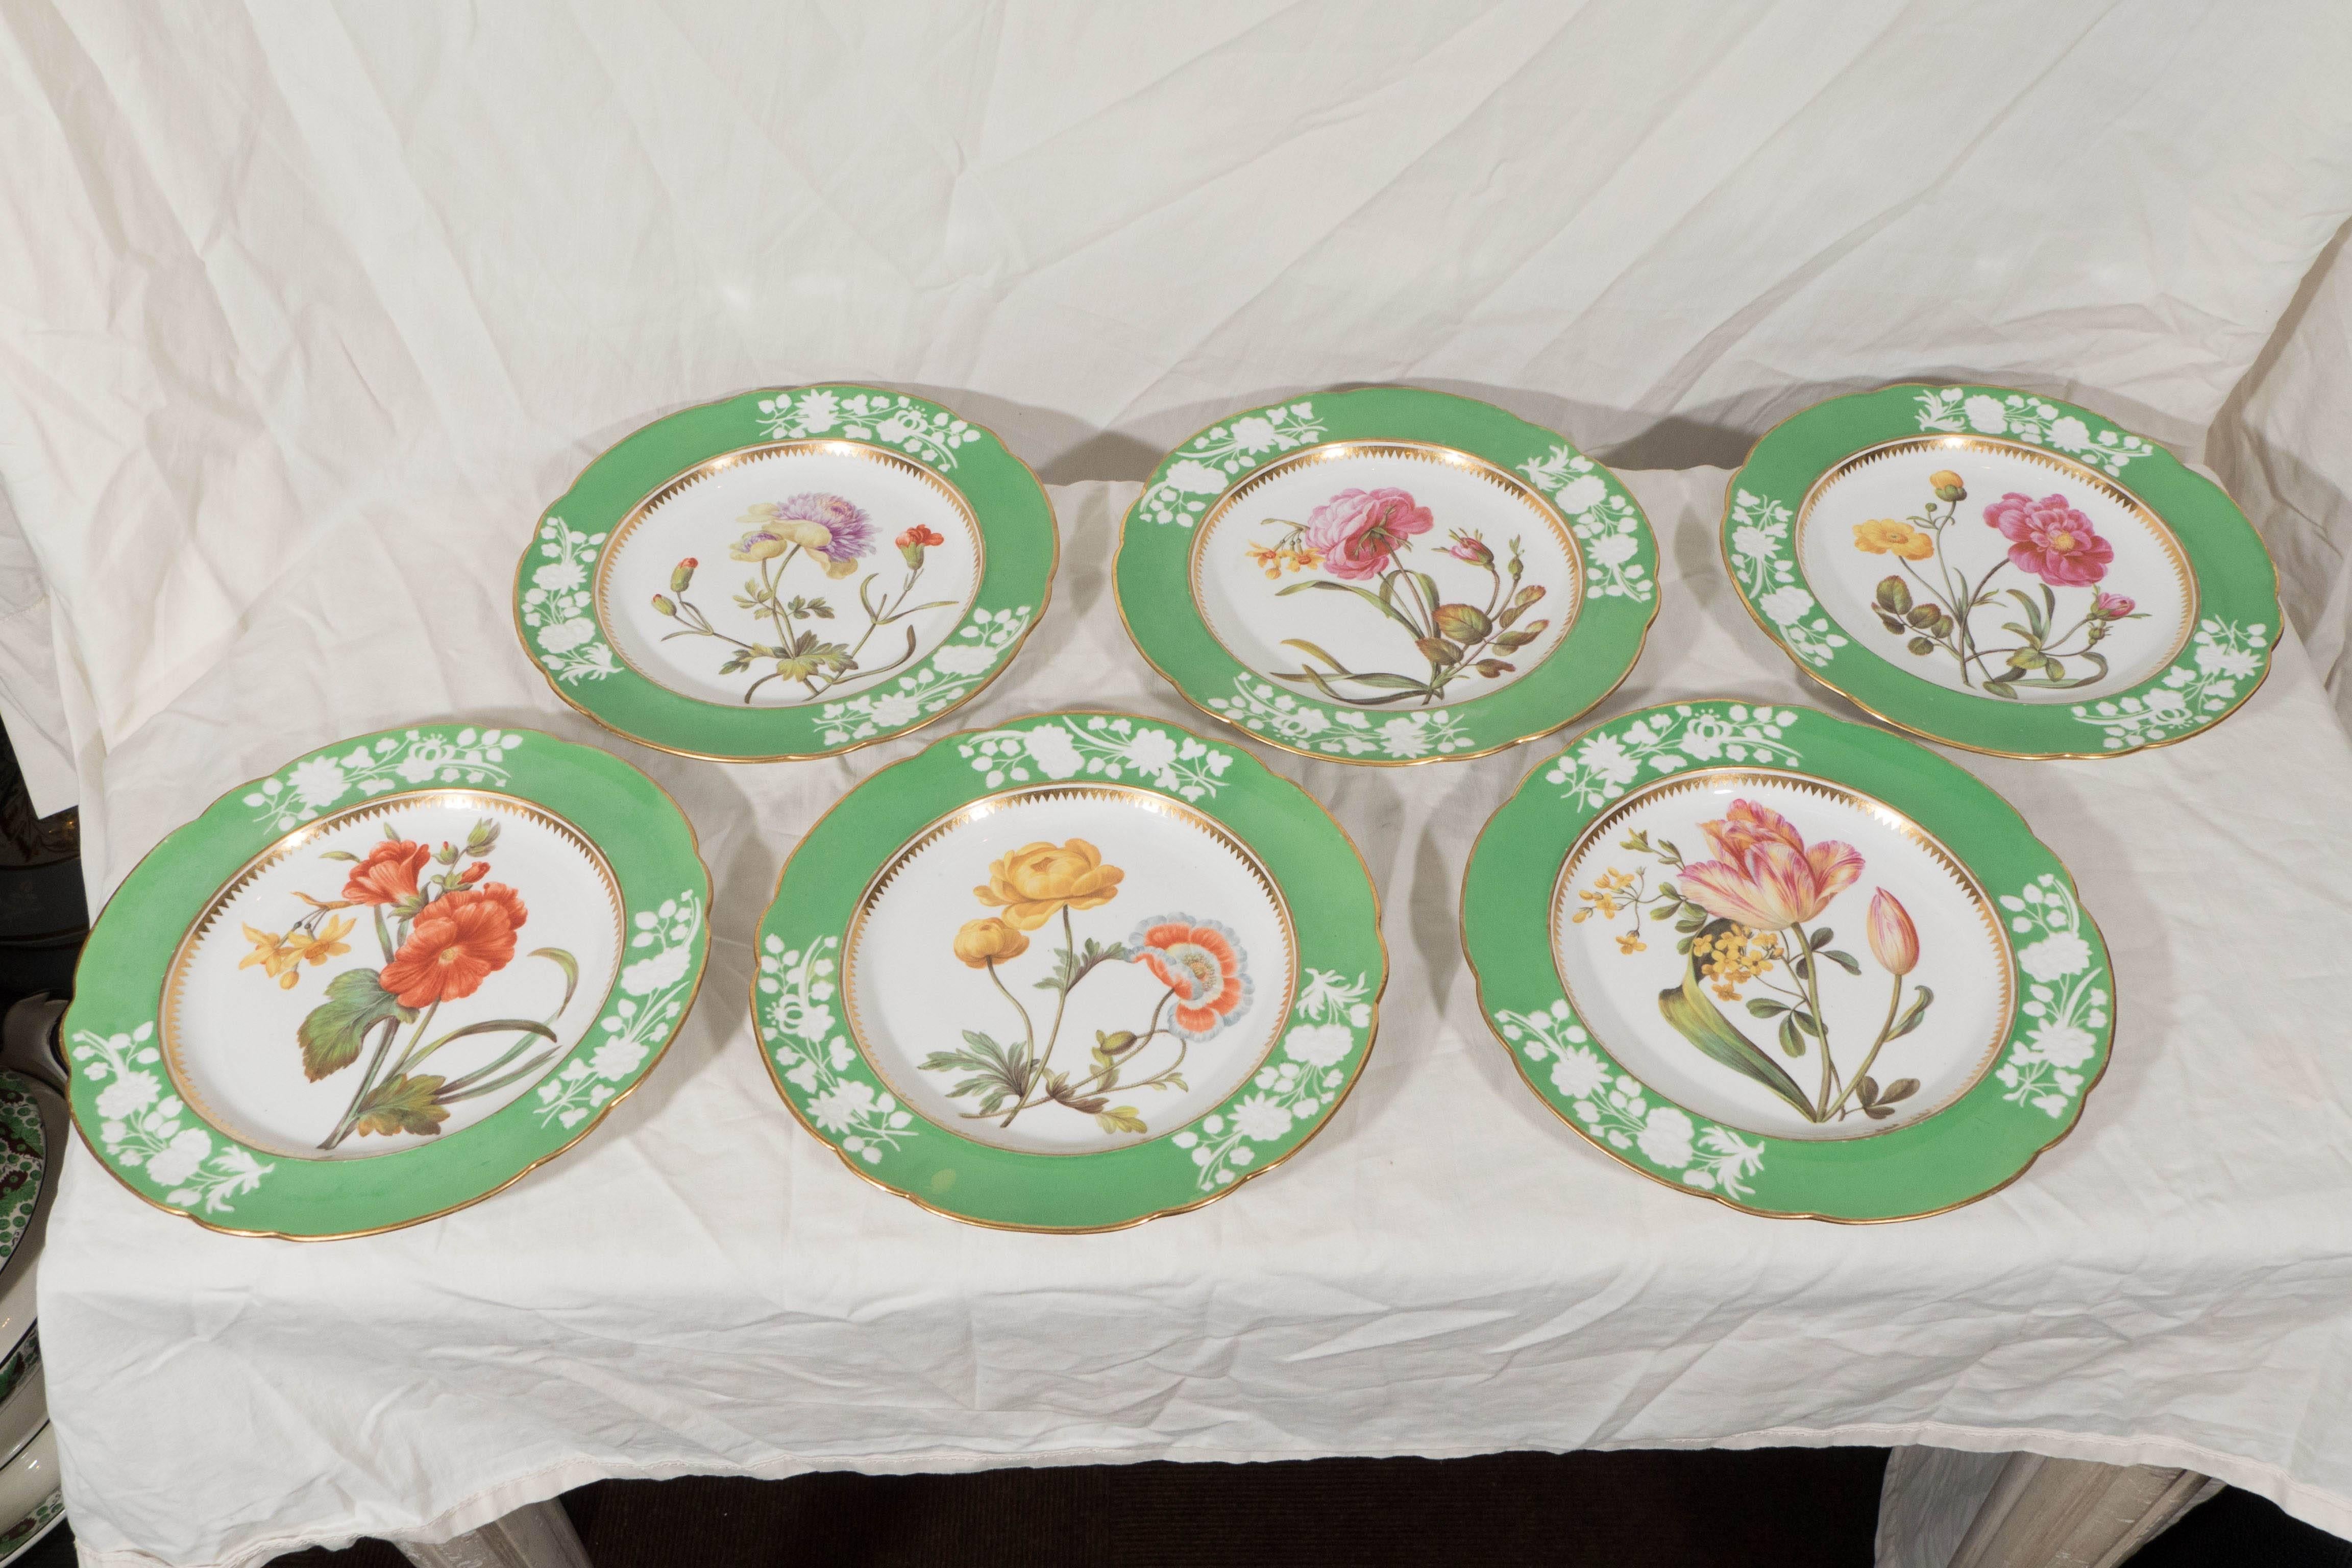 Romantic Antique Porcelain Dishes Apple Green Borders Hand-Painted  Botanical Flowers